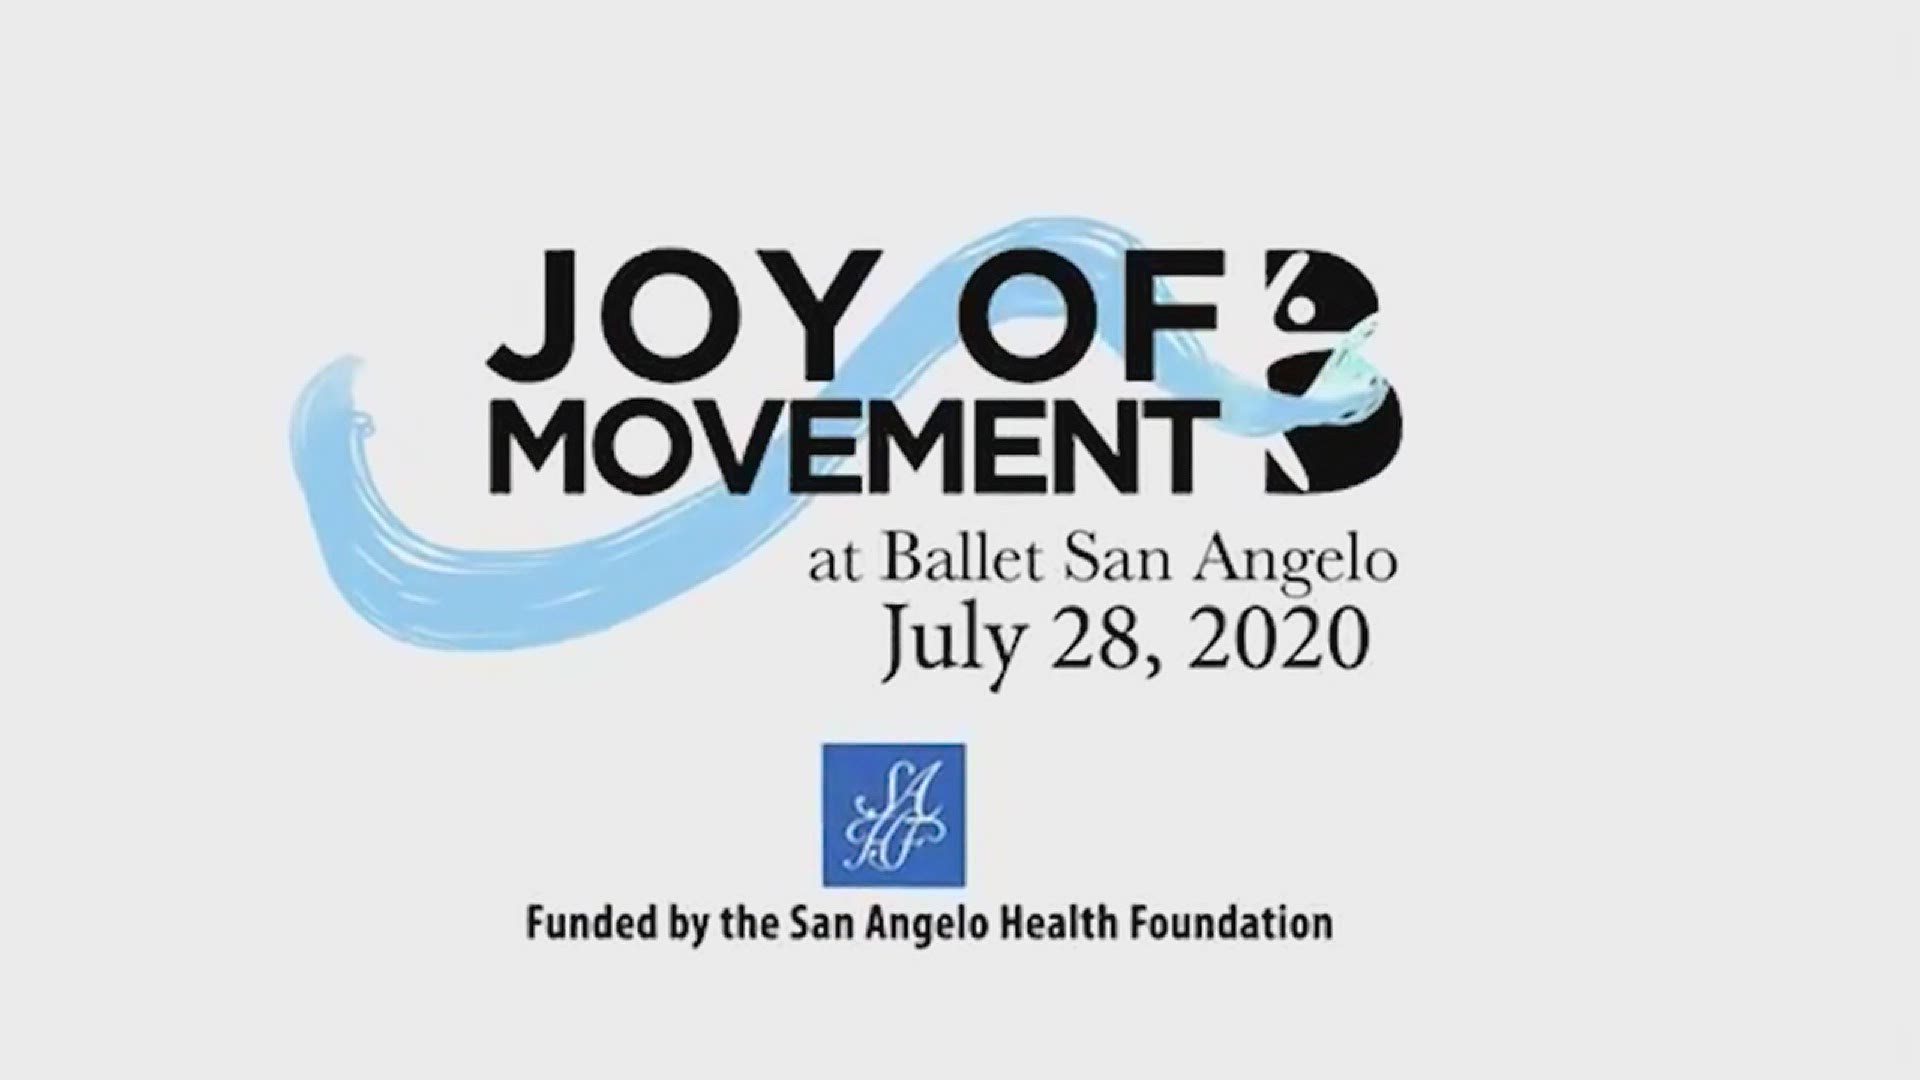 Joy of Movement at Ballet San Angelo continues with its virtual classes to help participants with balance, strength, and motor skills, including feet exercises.